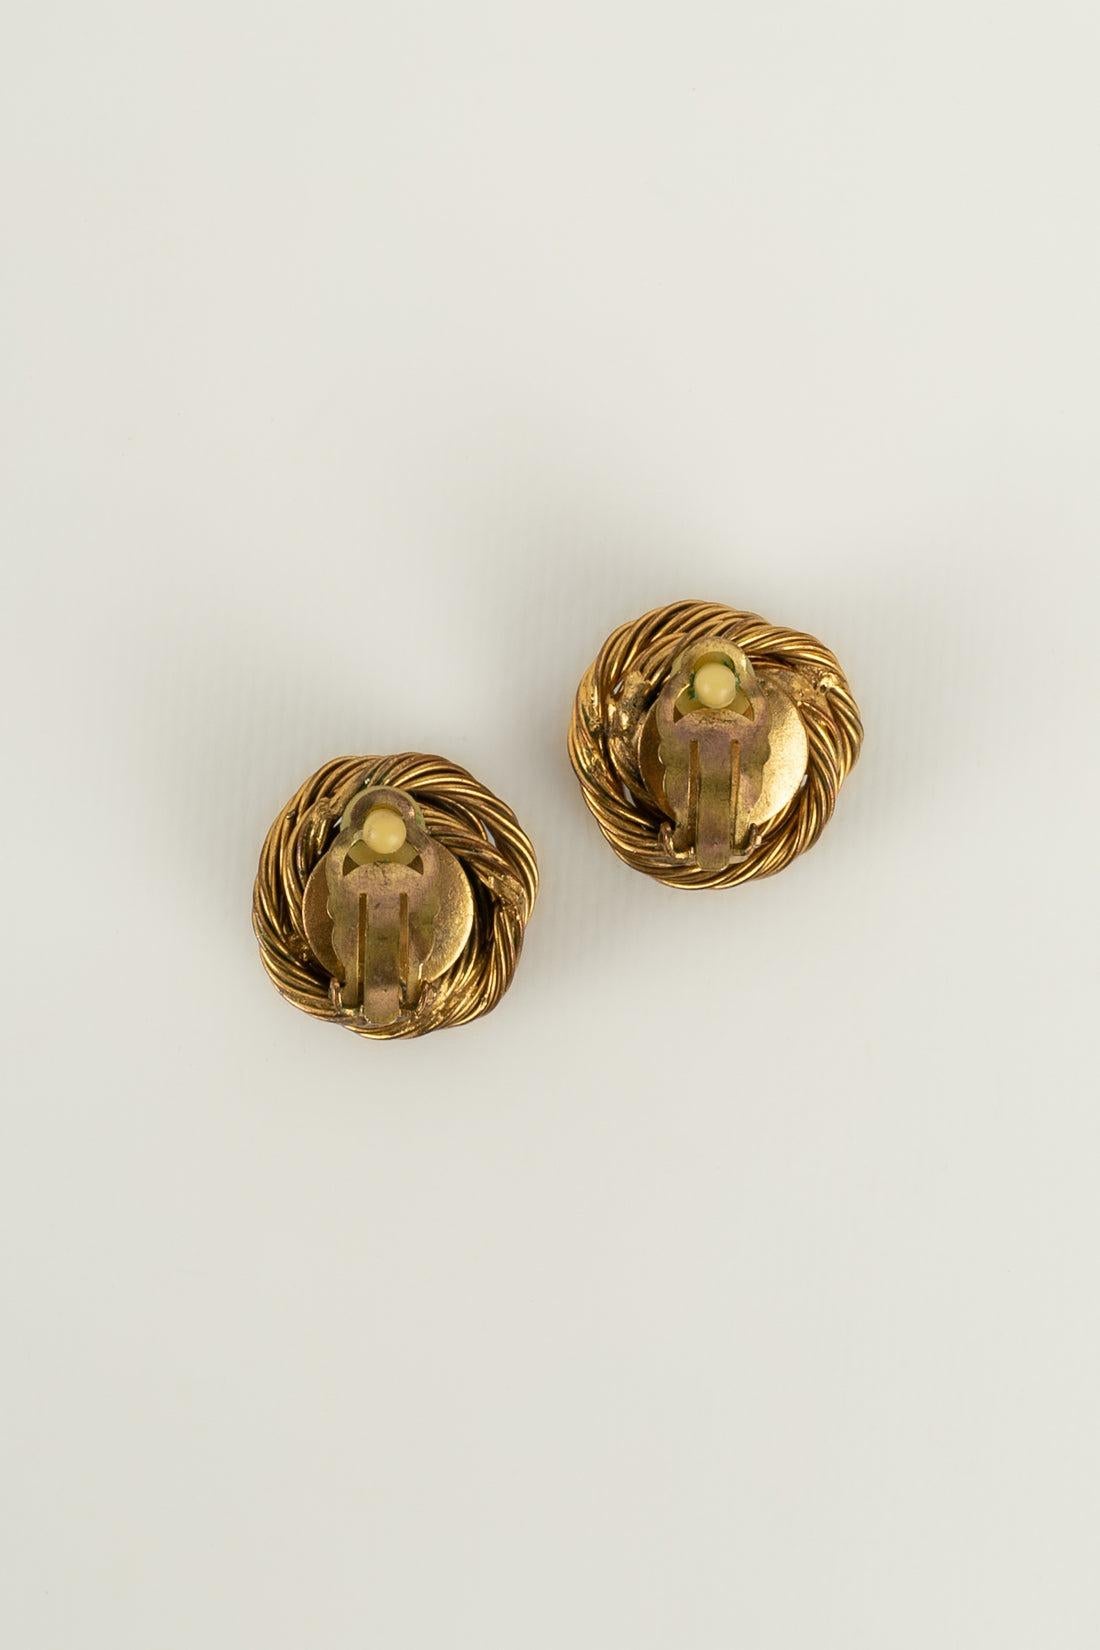 Chanel Earrings in Golden Metal, 1980 In Excellent Condition For Sale In SAINT-OUEN-SUR-SEINE, FR